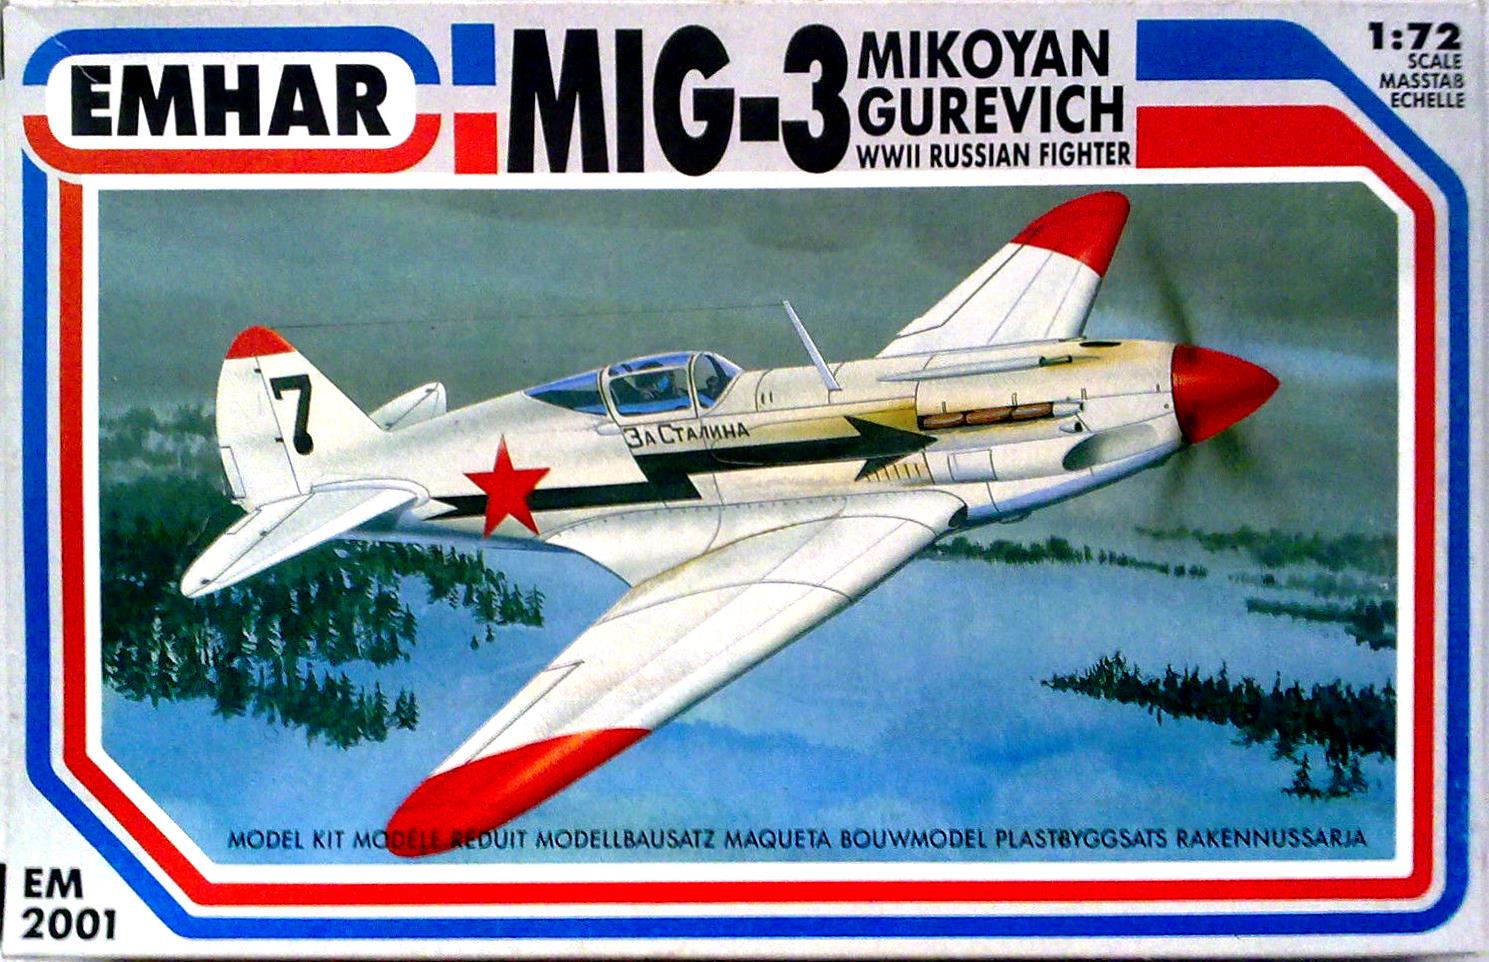 EMHAR EM2001 Mikoyan and Gurevich MiG-3, 90-s, box with tuck ends